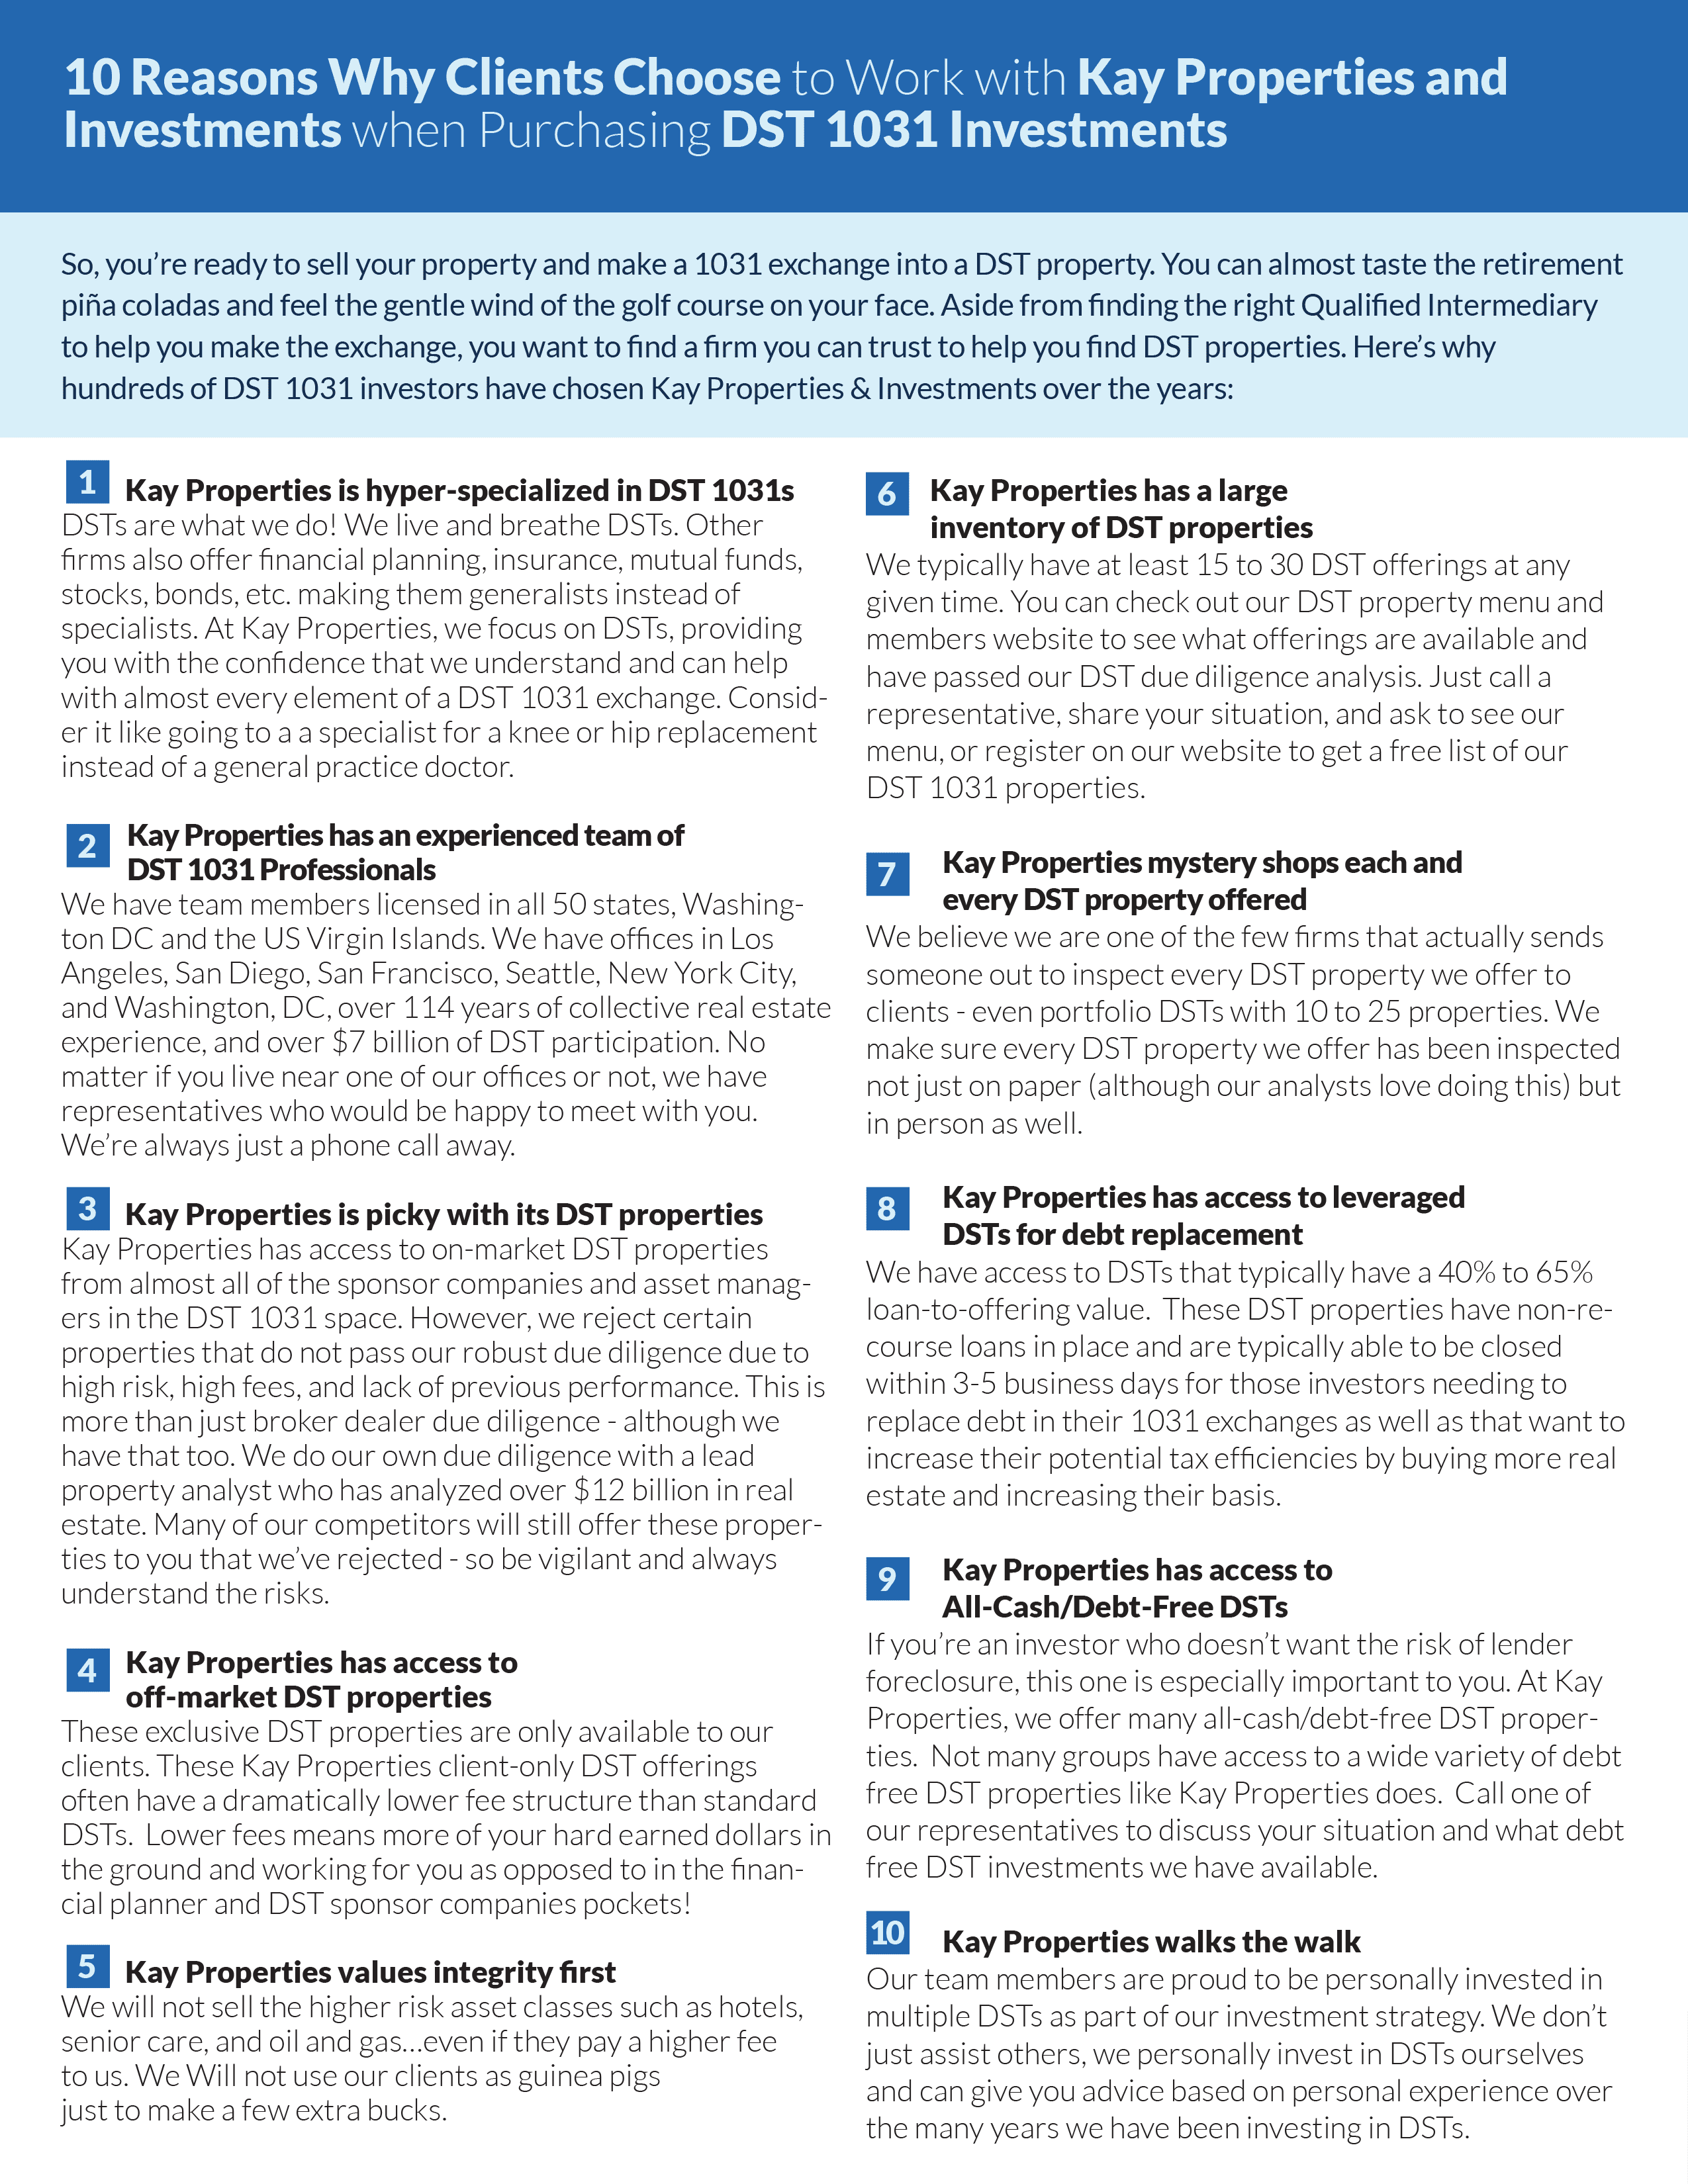 10 Reasons White Paper - Page 2